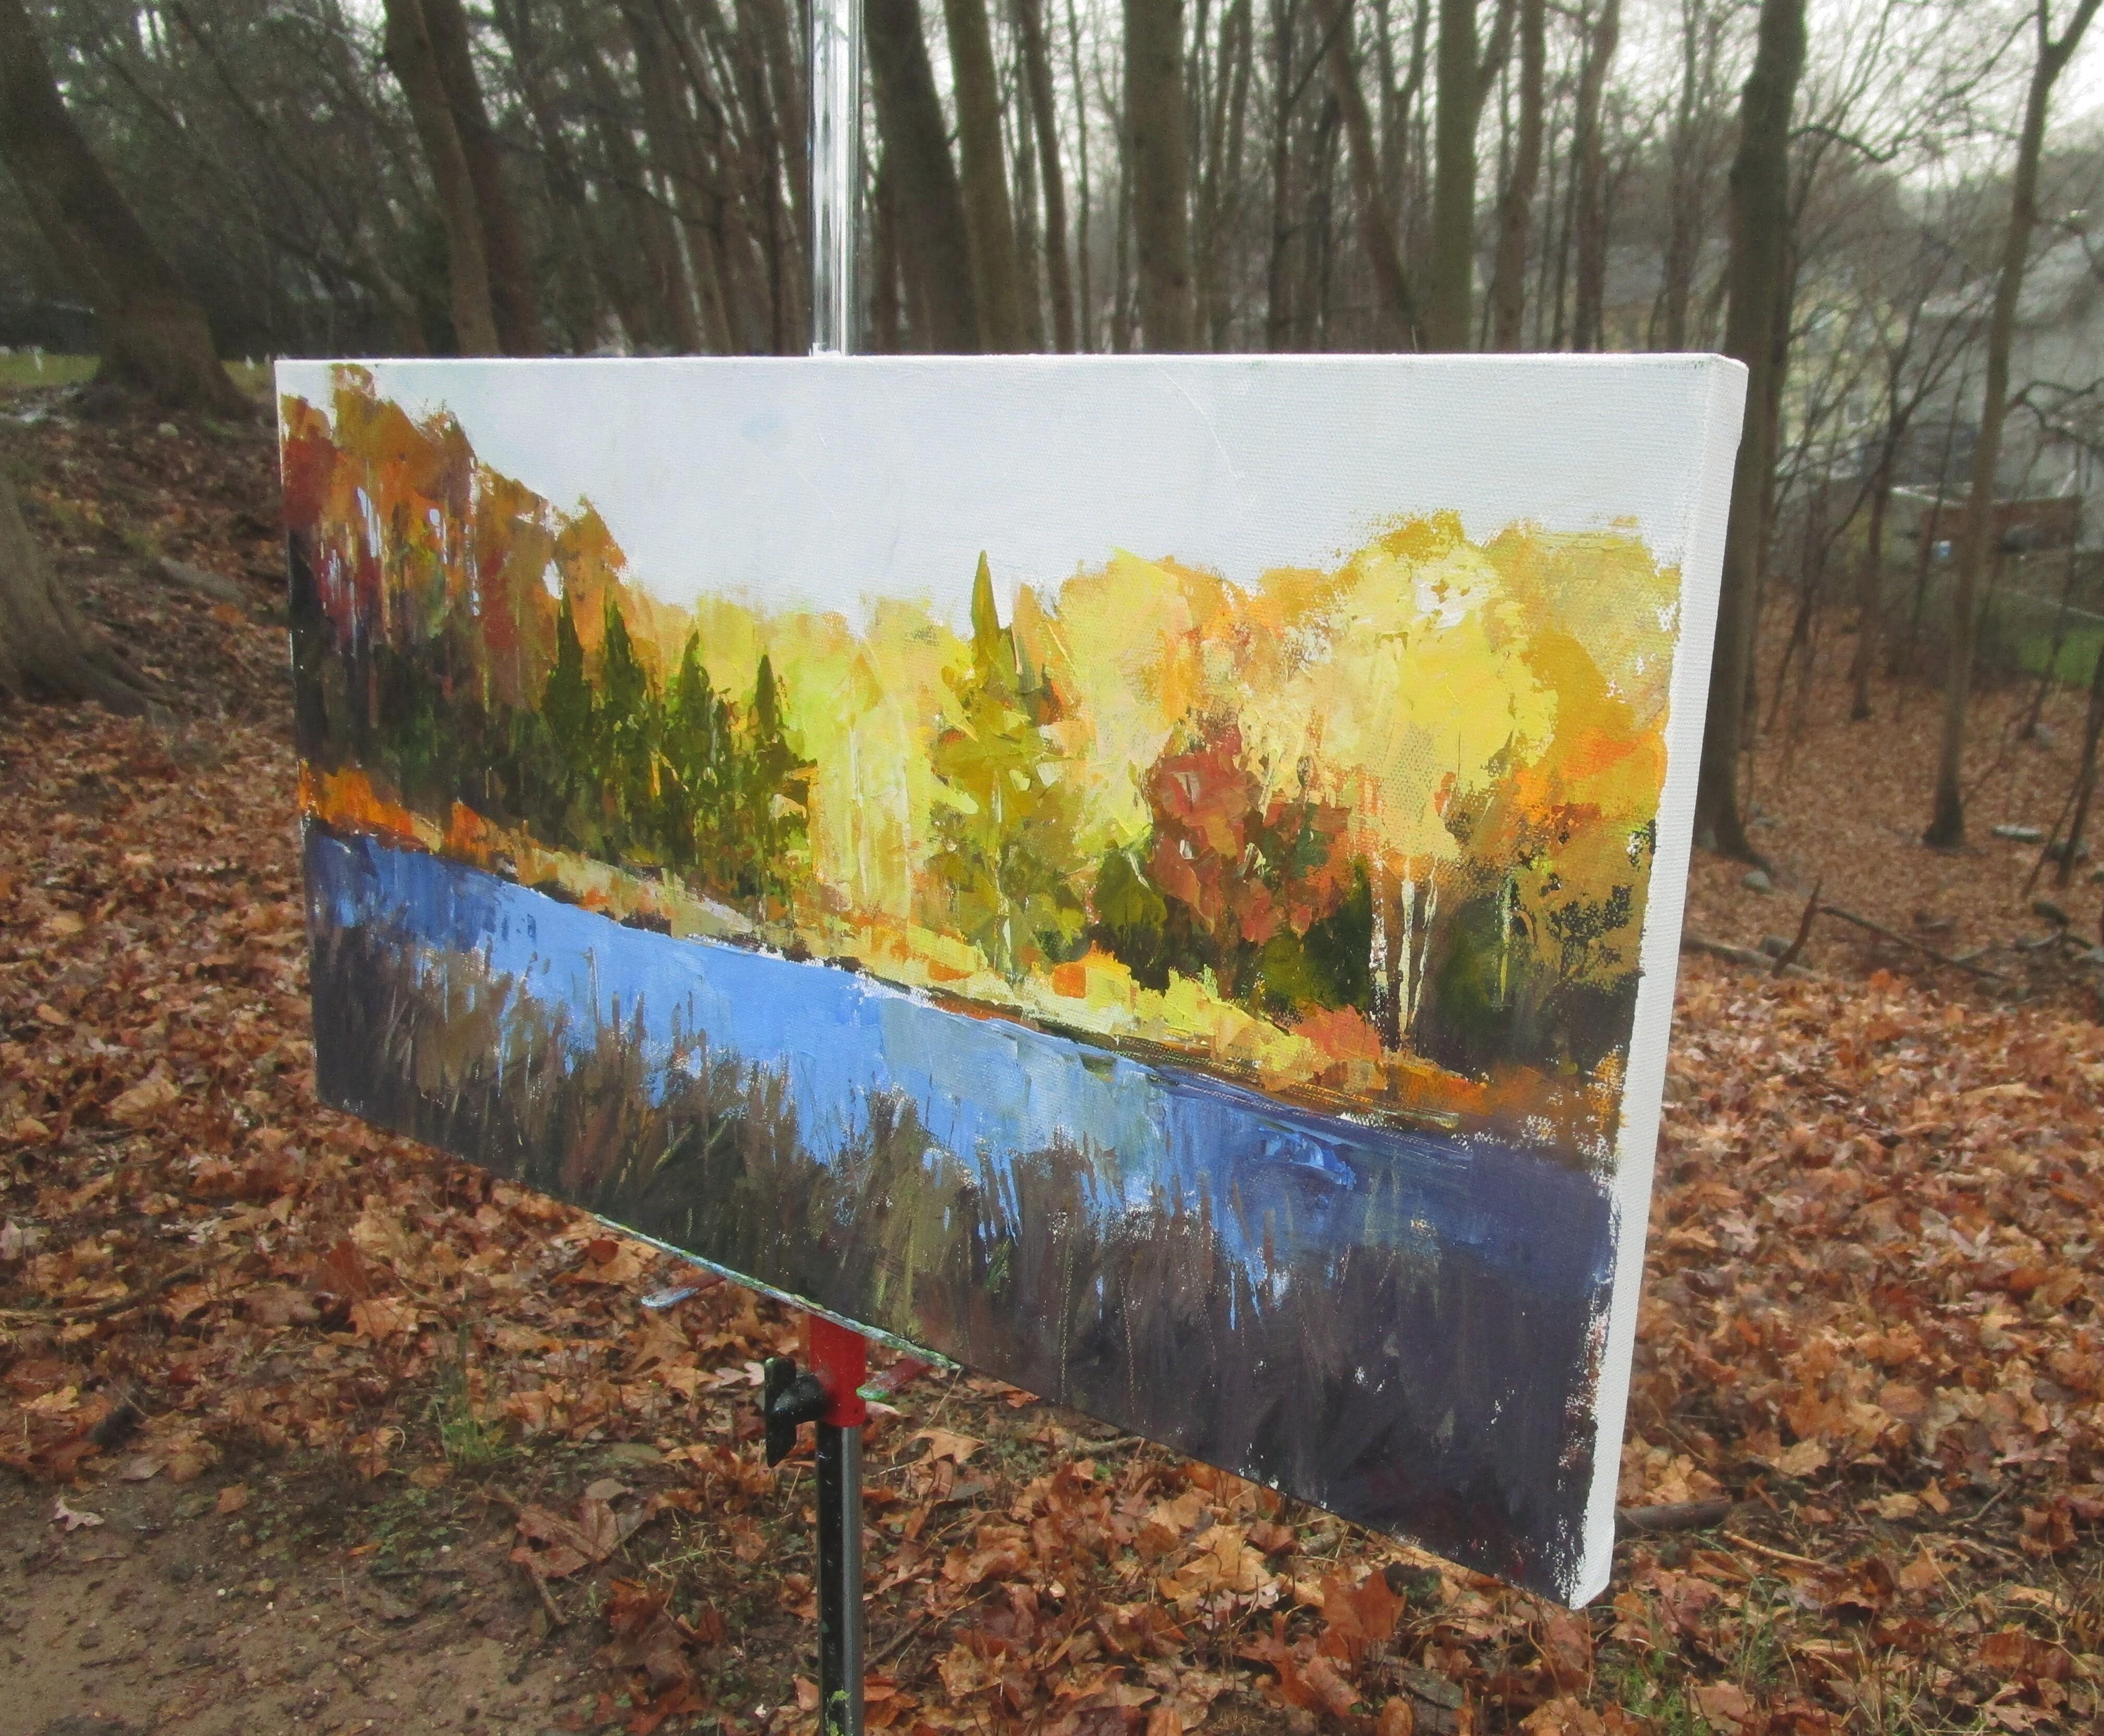 <p>Artist Comments<br>This painting portrays a nature preserve and a bird sanctuary nestled amidst subdivisions. The composition features a tranquil pond surrounded by autumn trees. With the sun setting low in the sky, the scene provides a serene